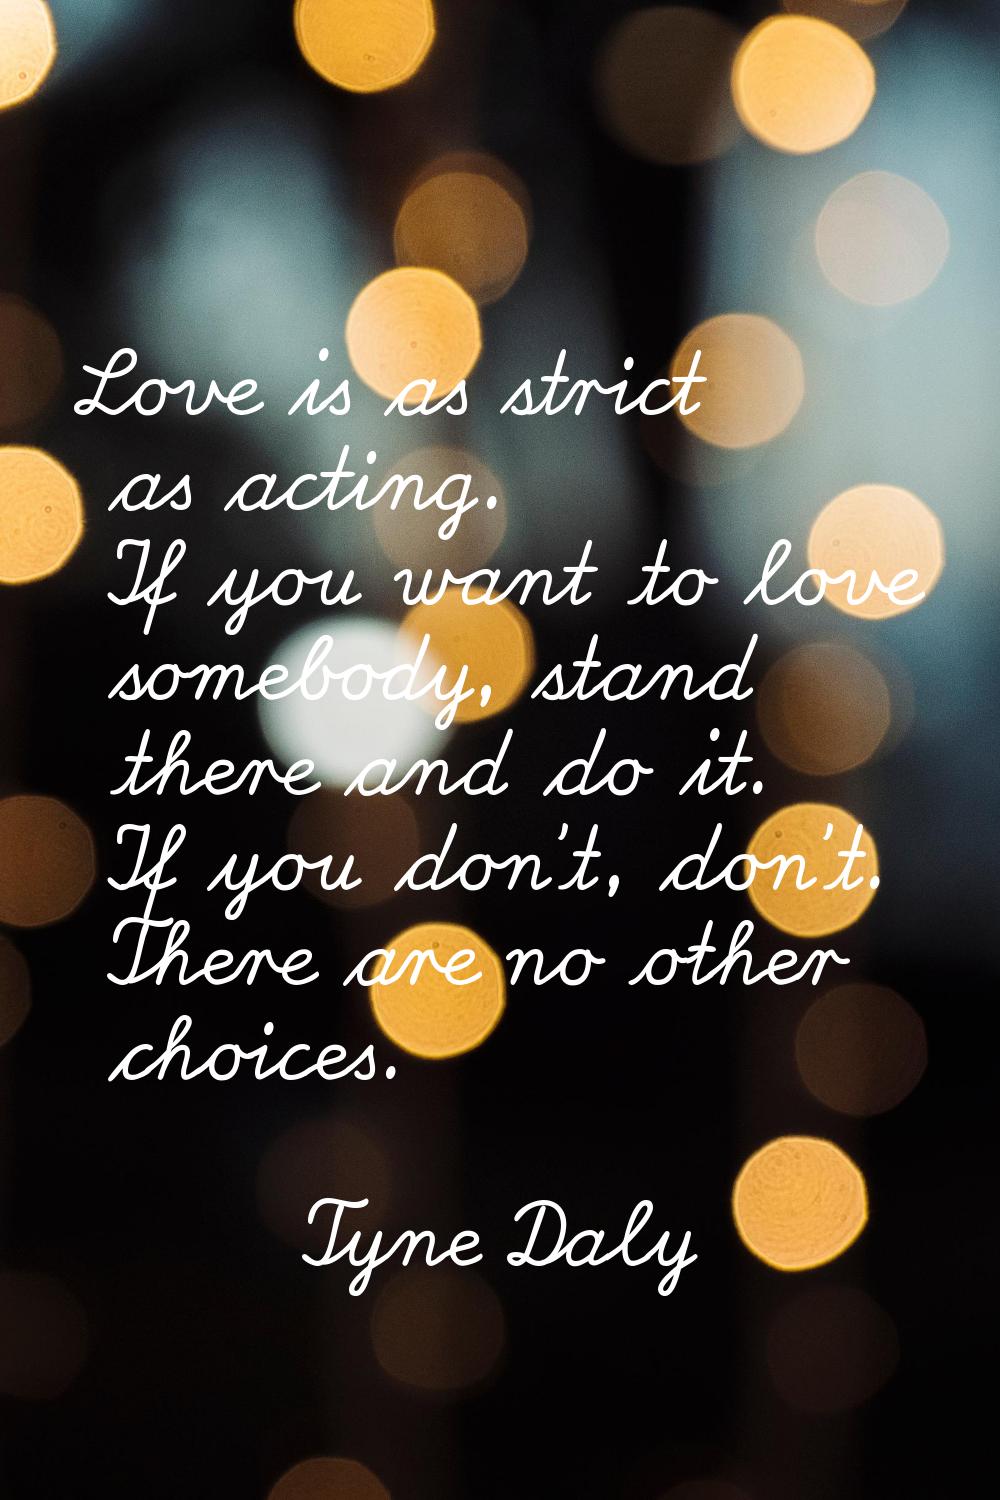 Love is as strict as acting. If you want to love somebody, stand there and do it. If you don't, don